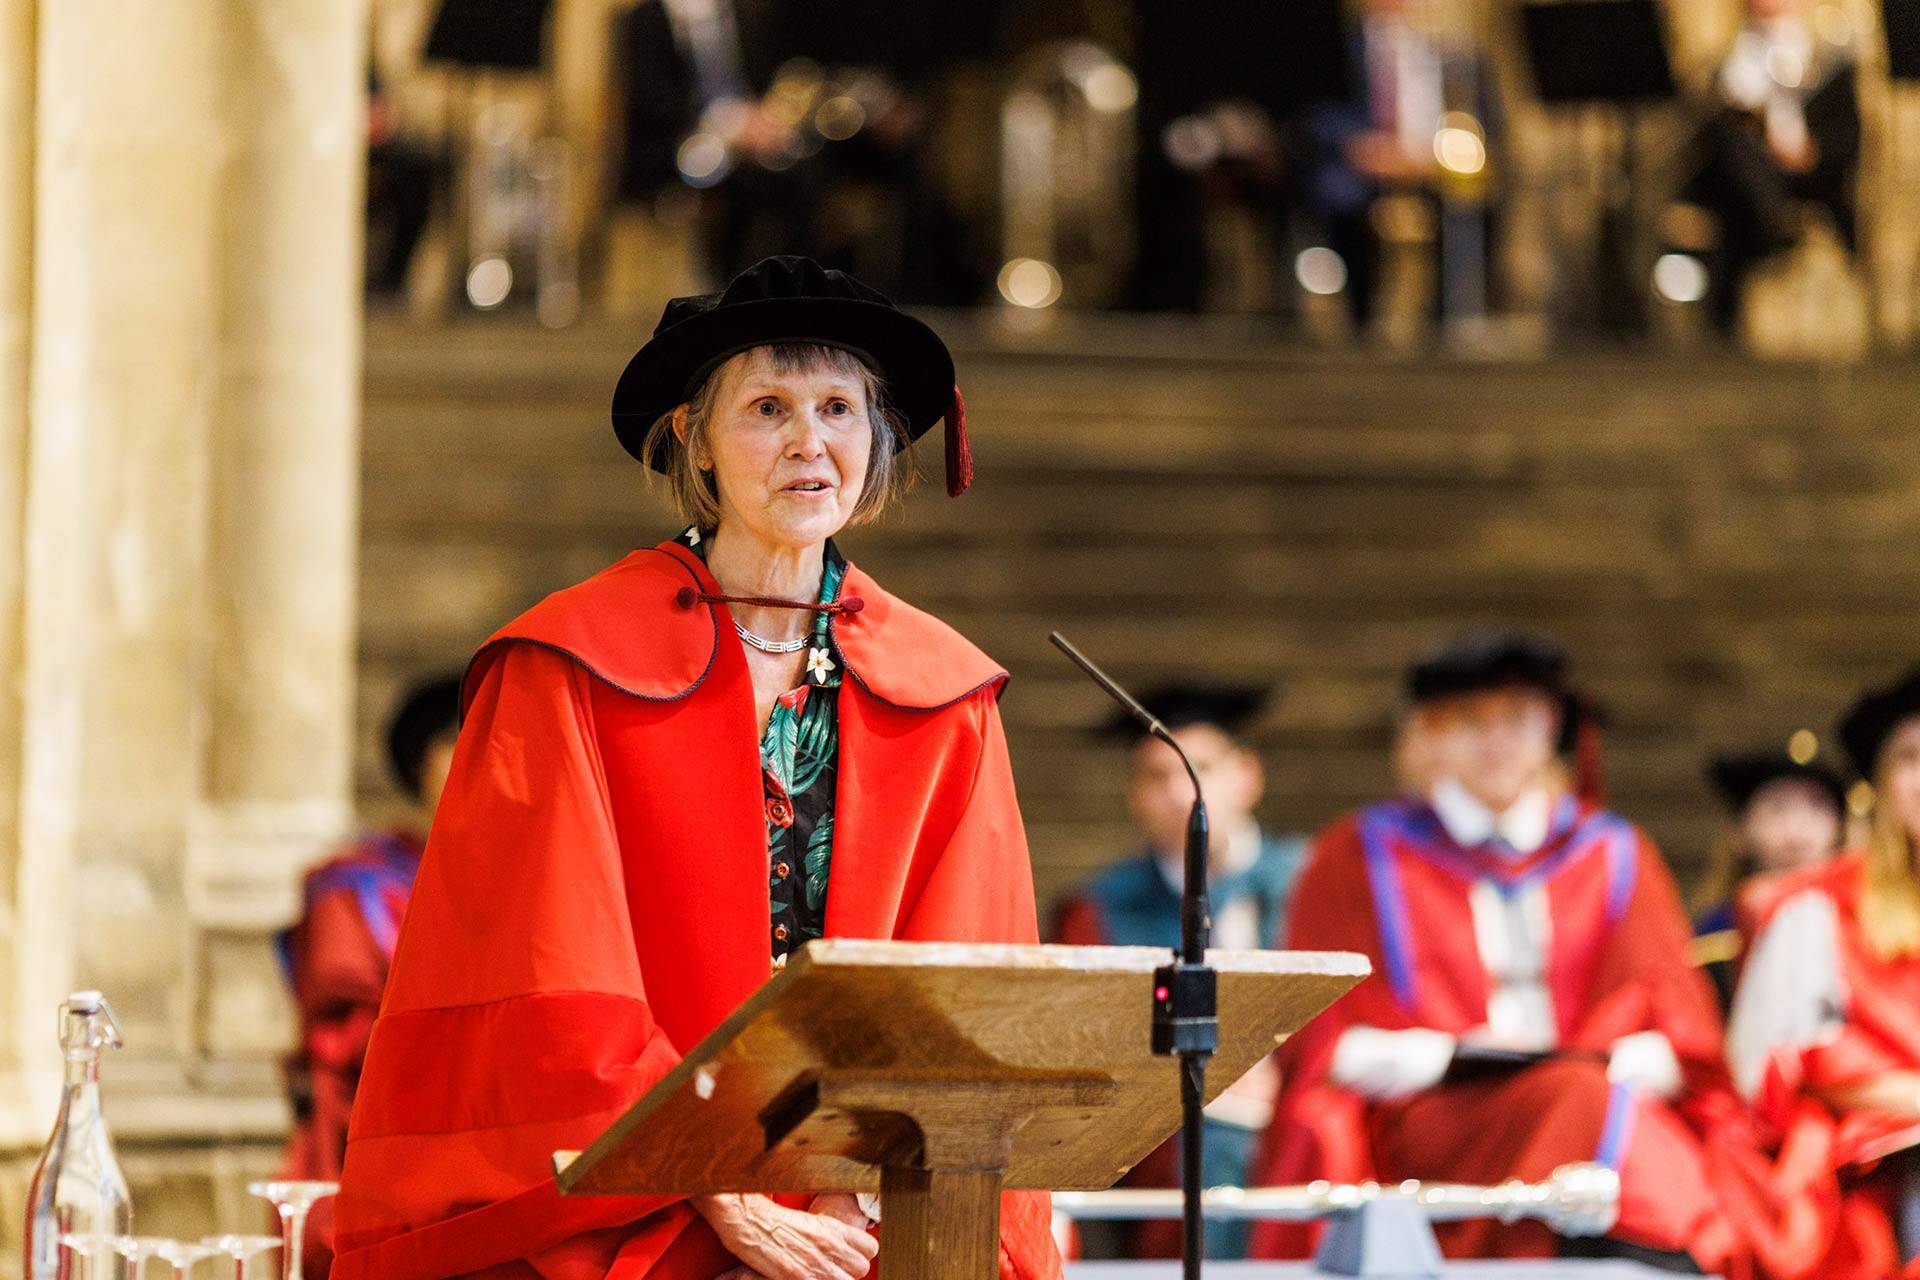 Susan Wanless speaking in Canterbury Cathedral at her honorary degree conferral, wearing red robes and a tudor bonnet